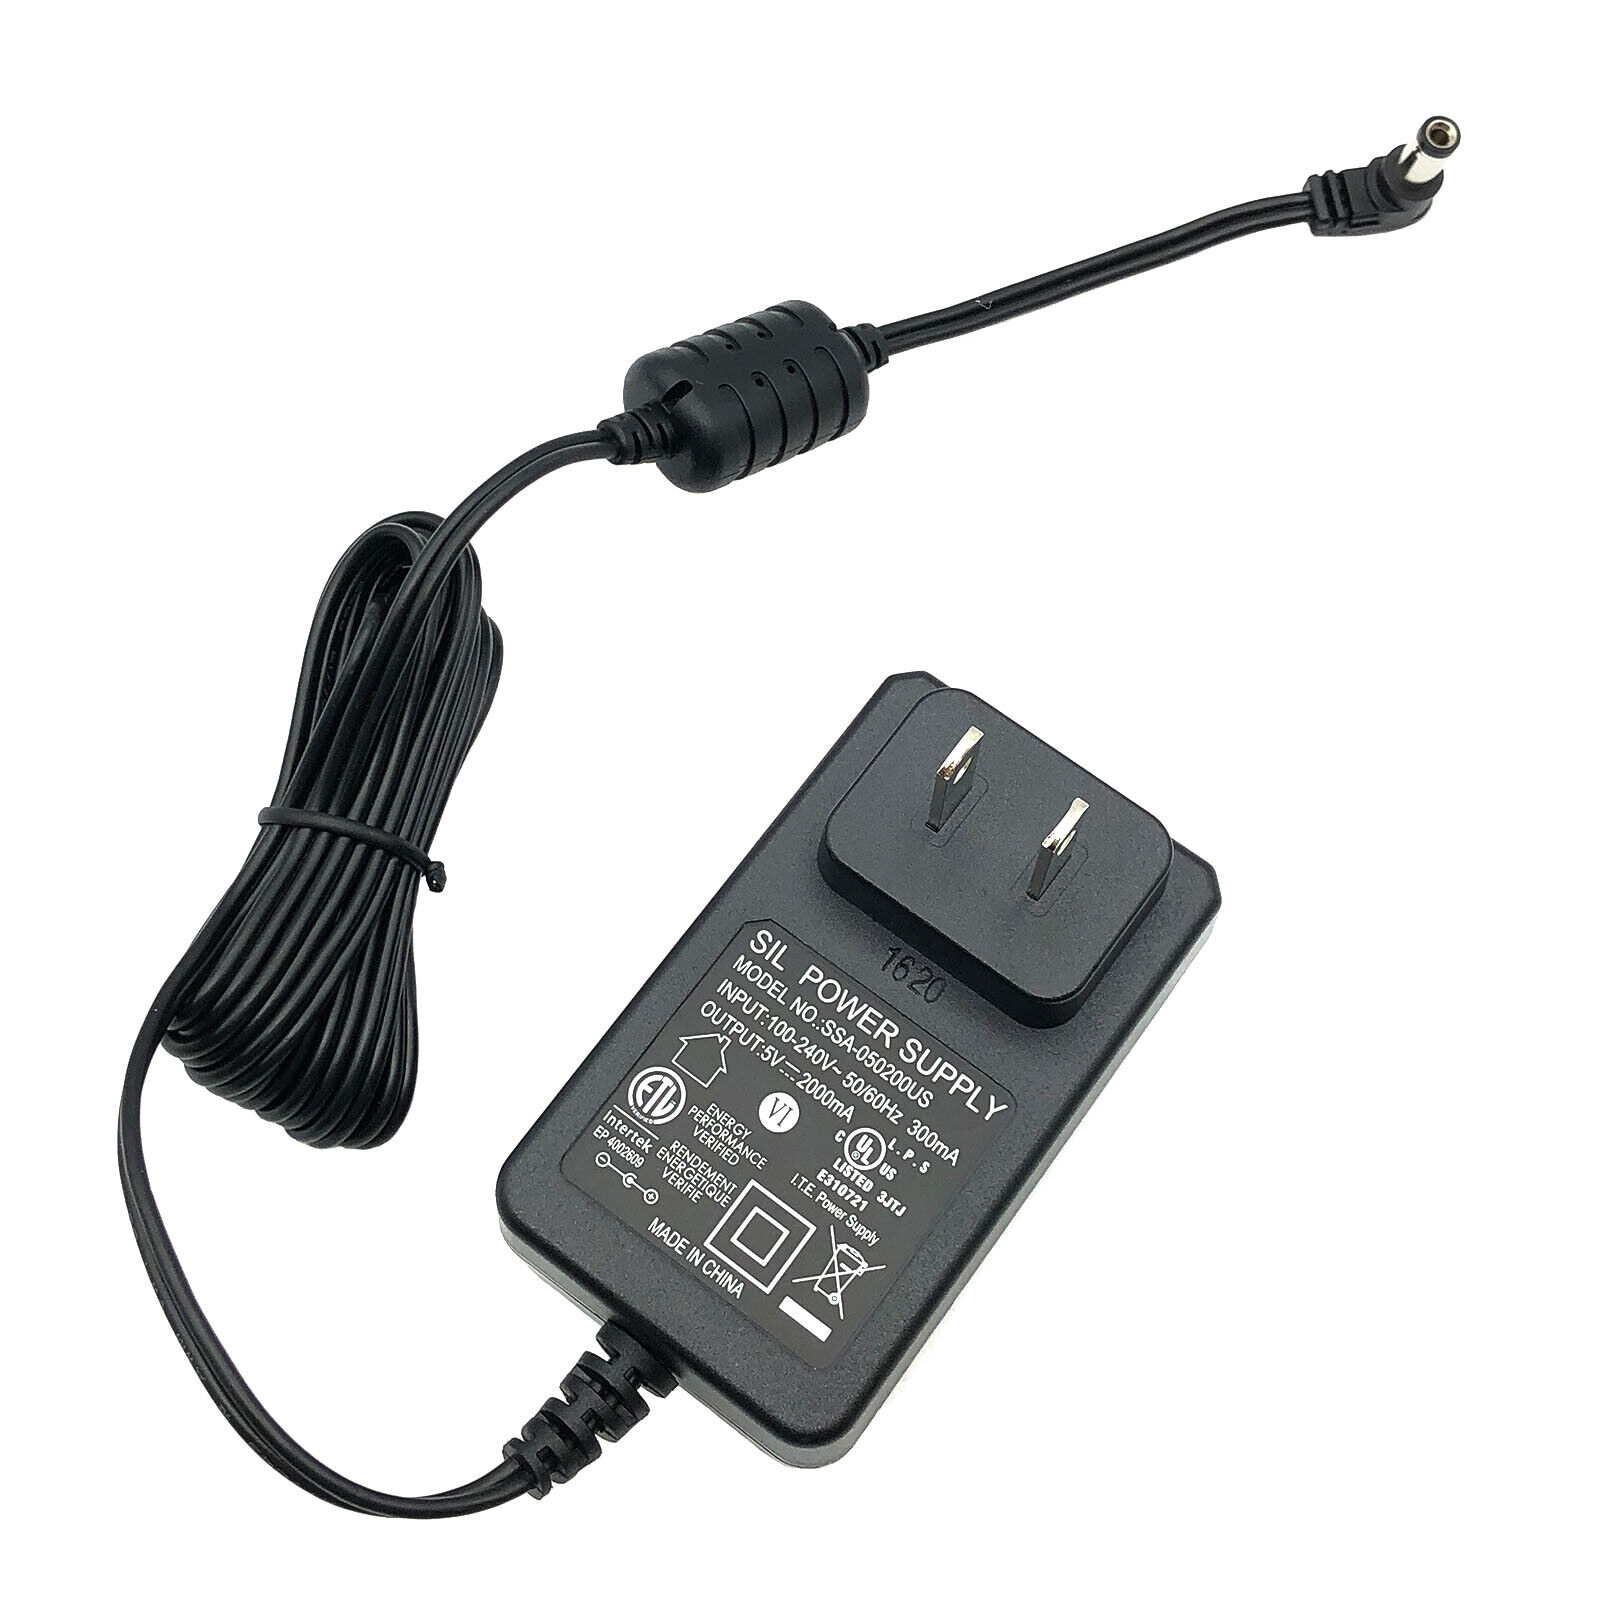 Genuine SIL AC/DC Adapter Power Supply Charger for Cisco ATA-182 ATA-186 w/Cord